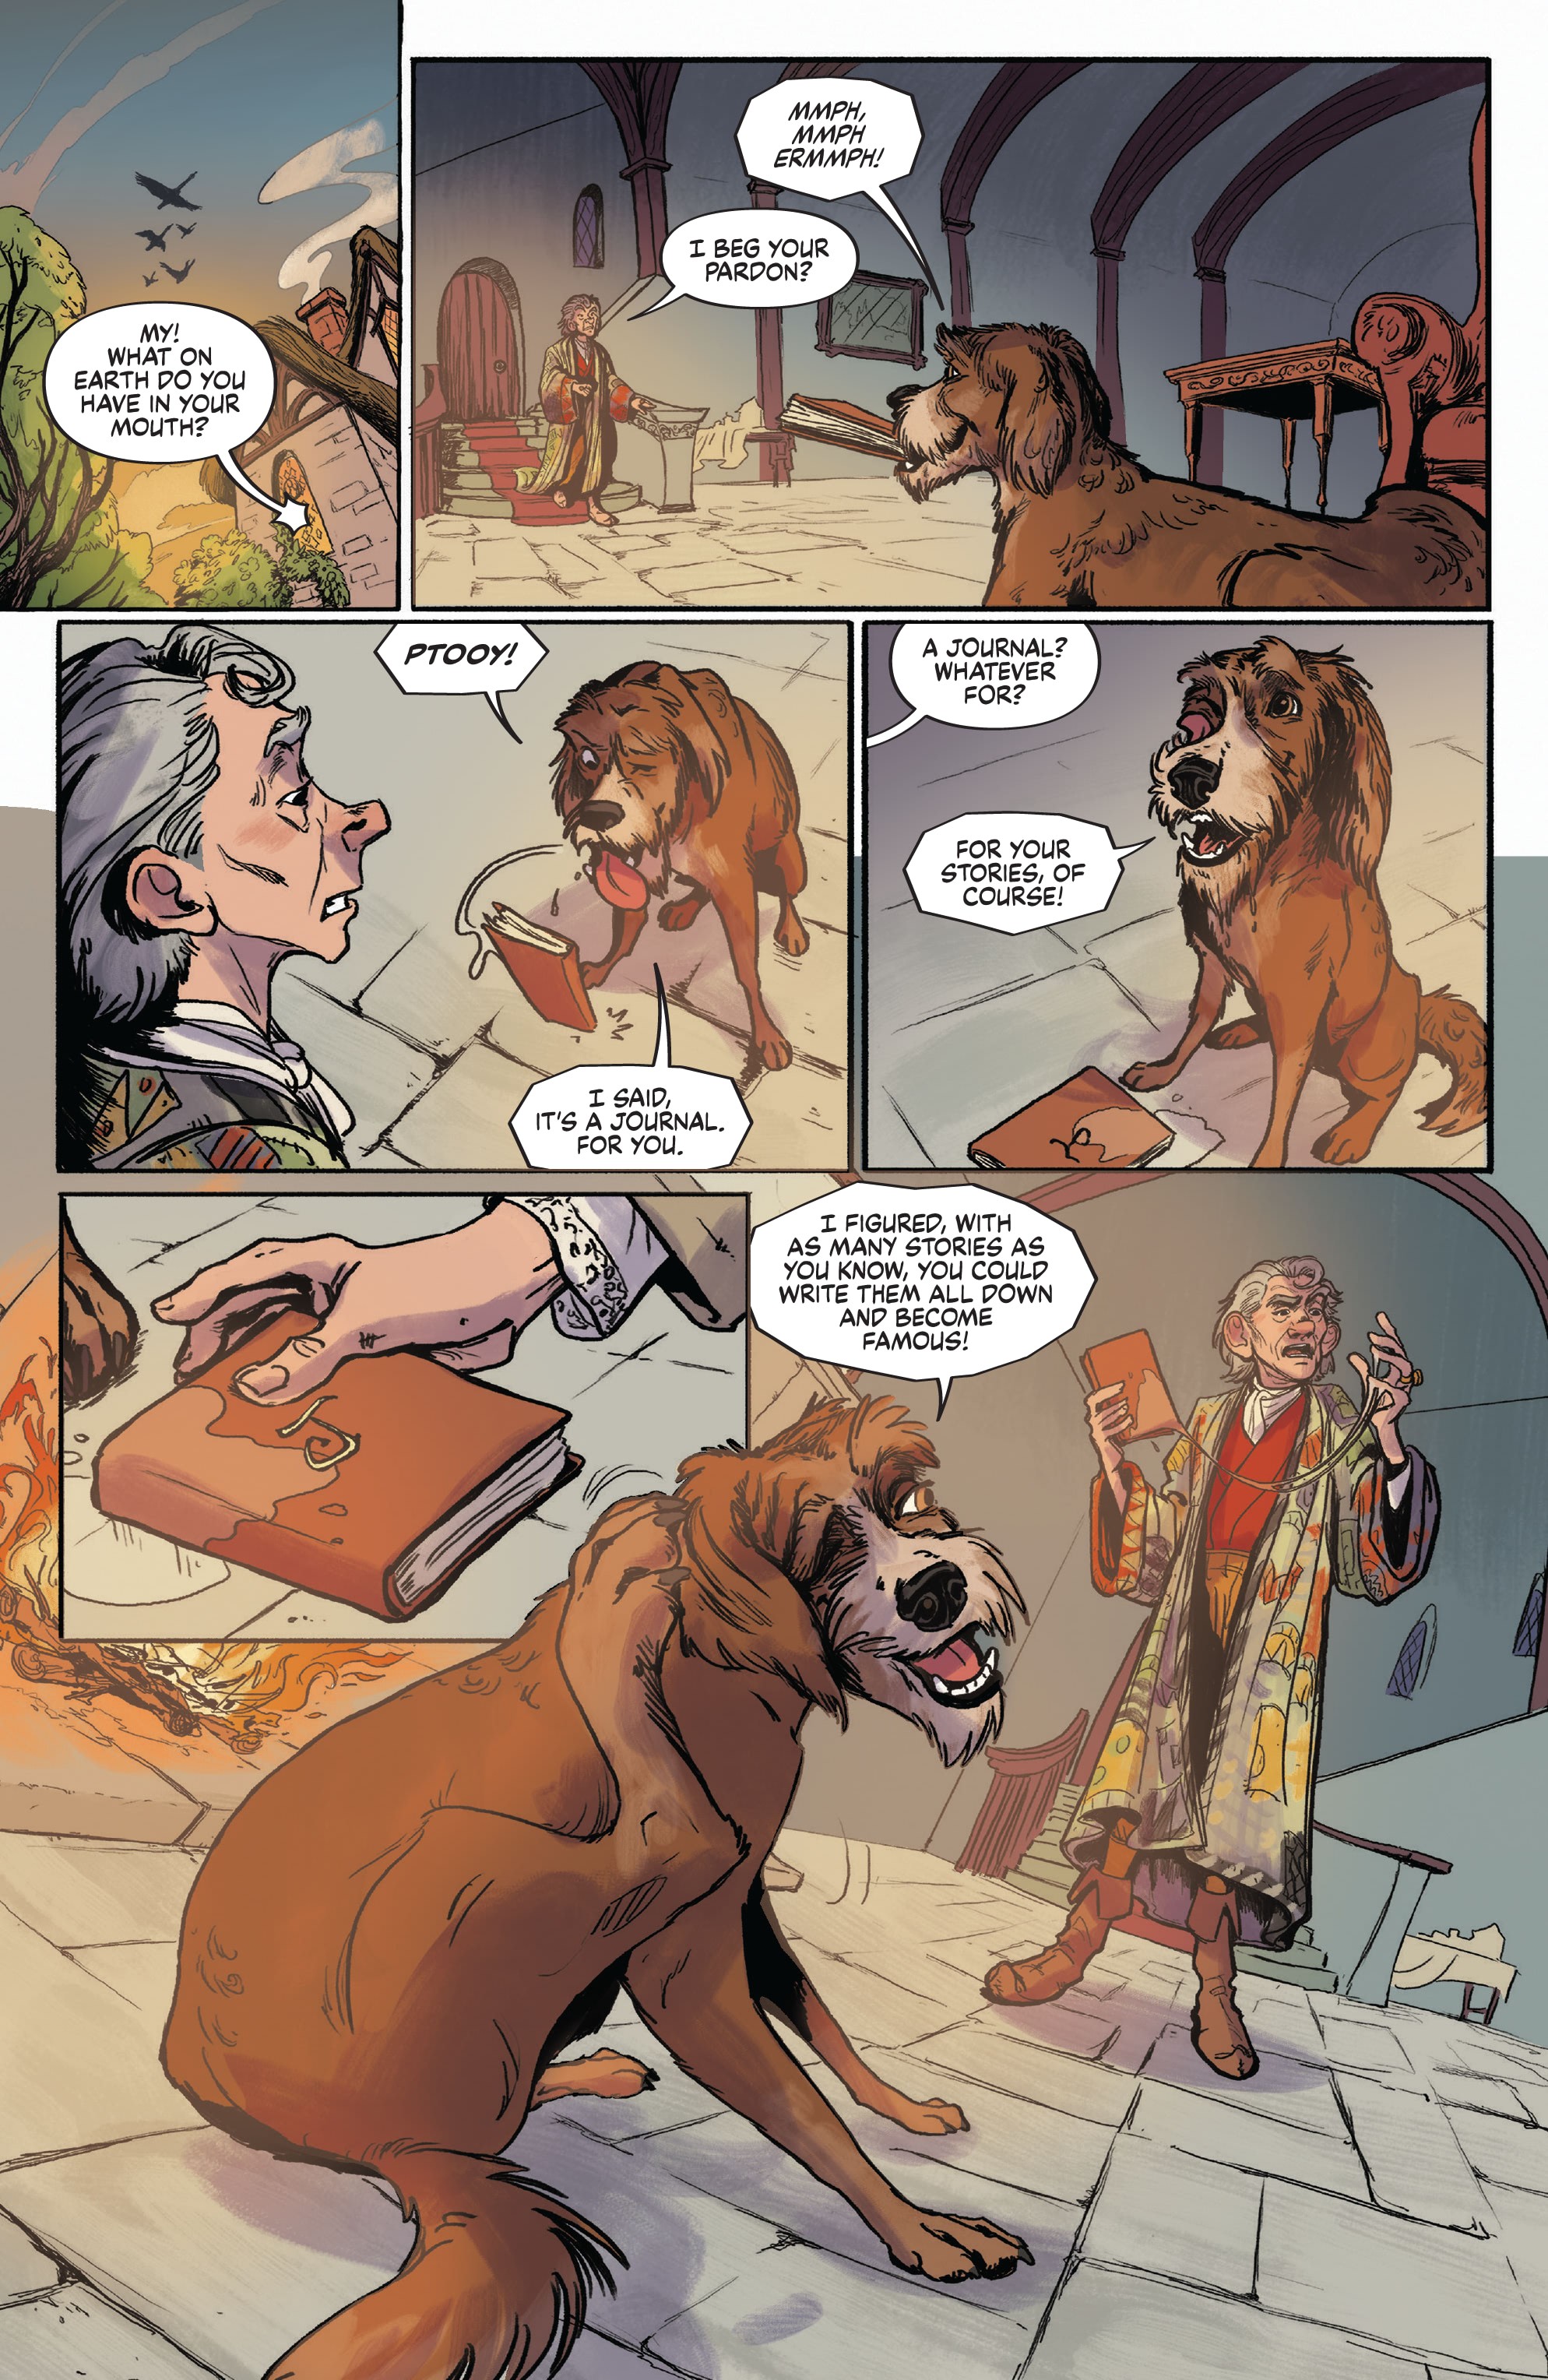 Jim Henson's The Storyteller: Shapeshifters (2022-): Chapter 1 - Page 3